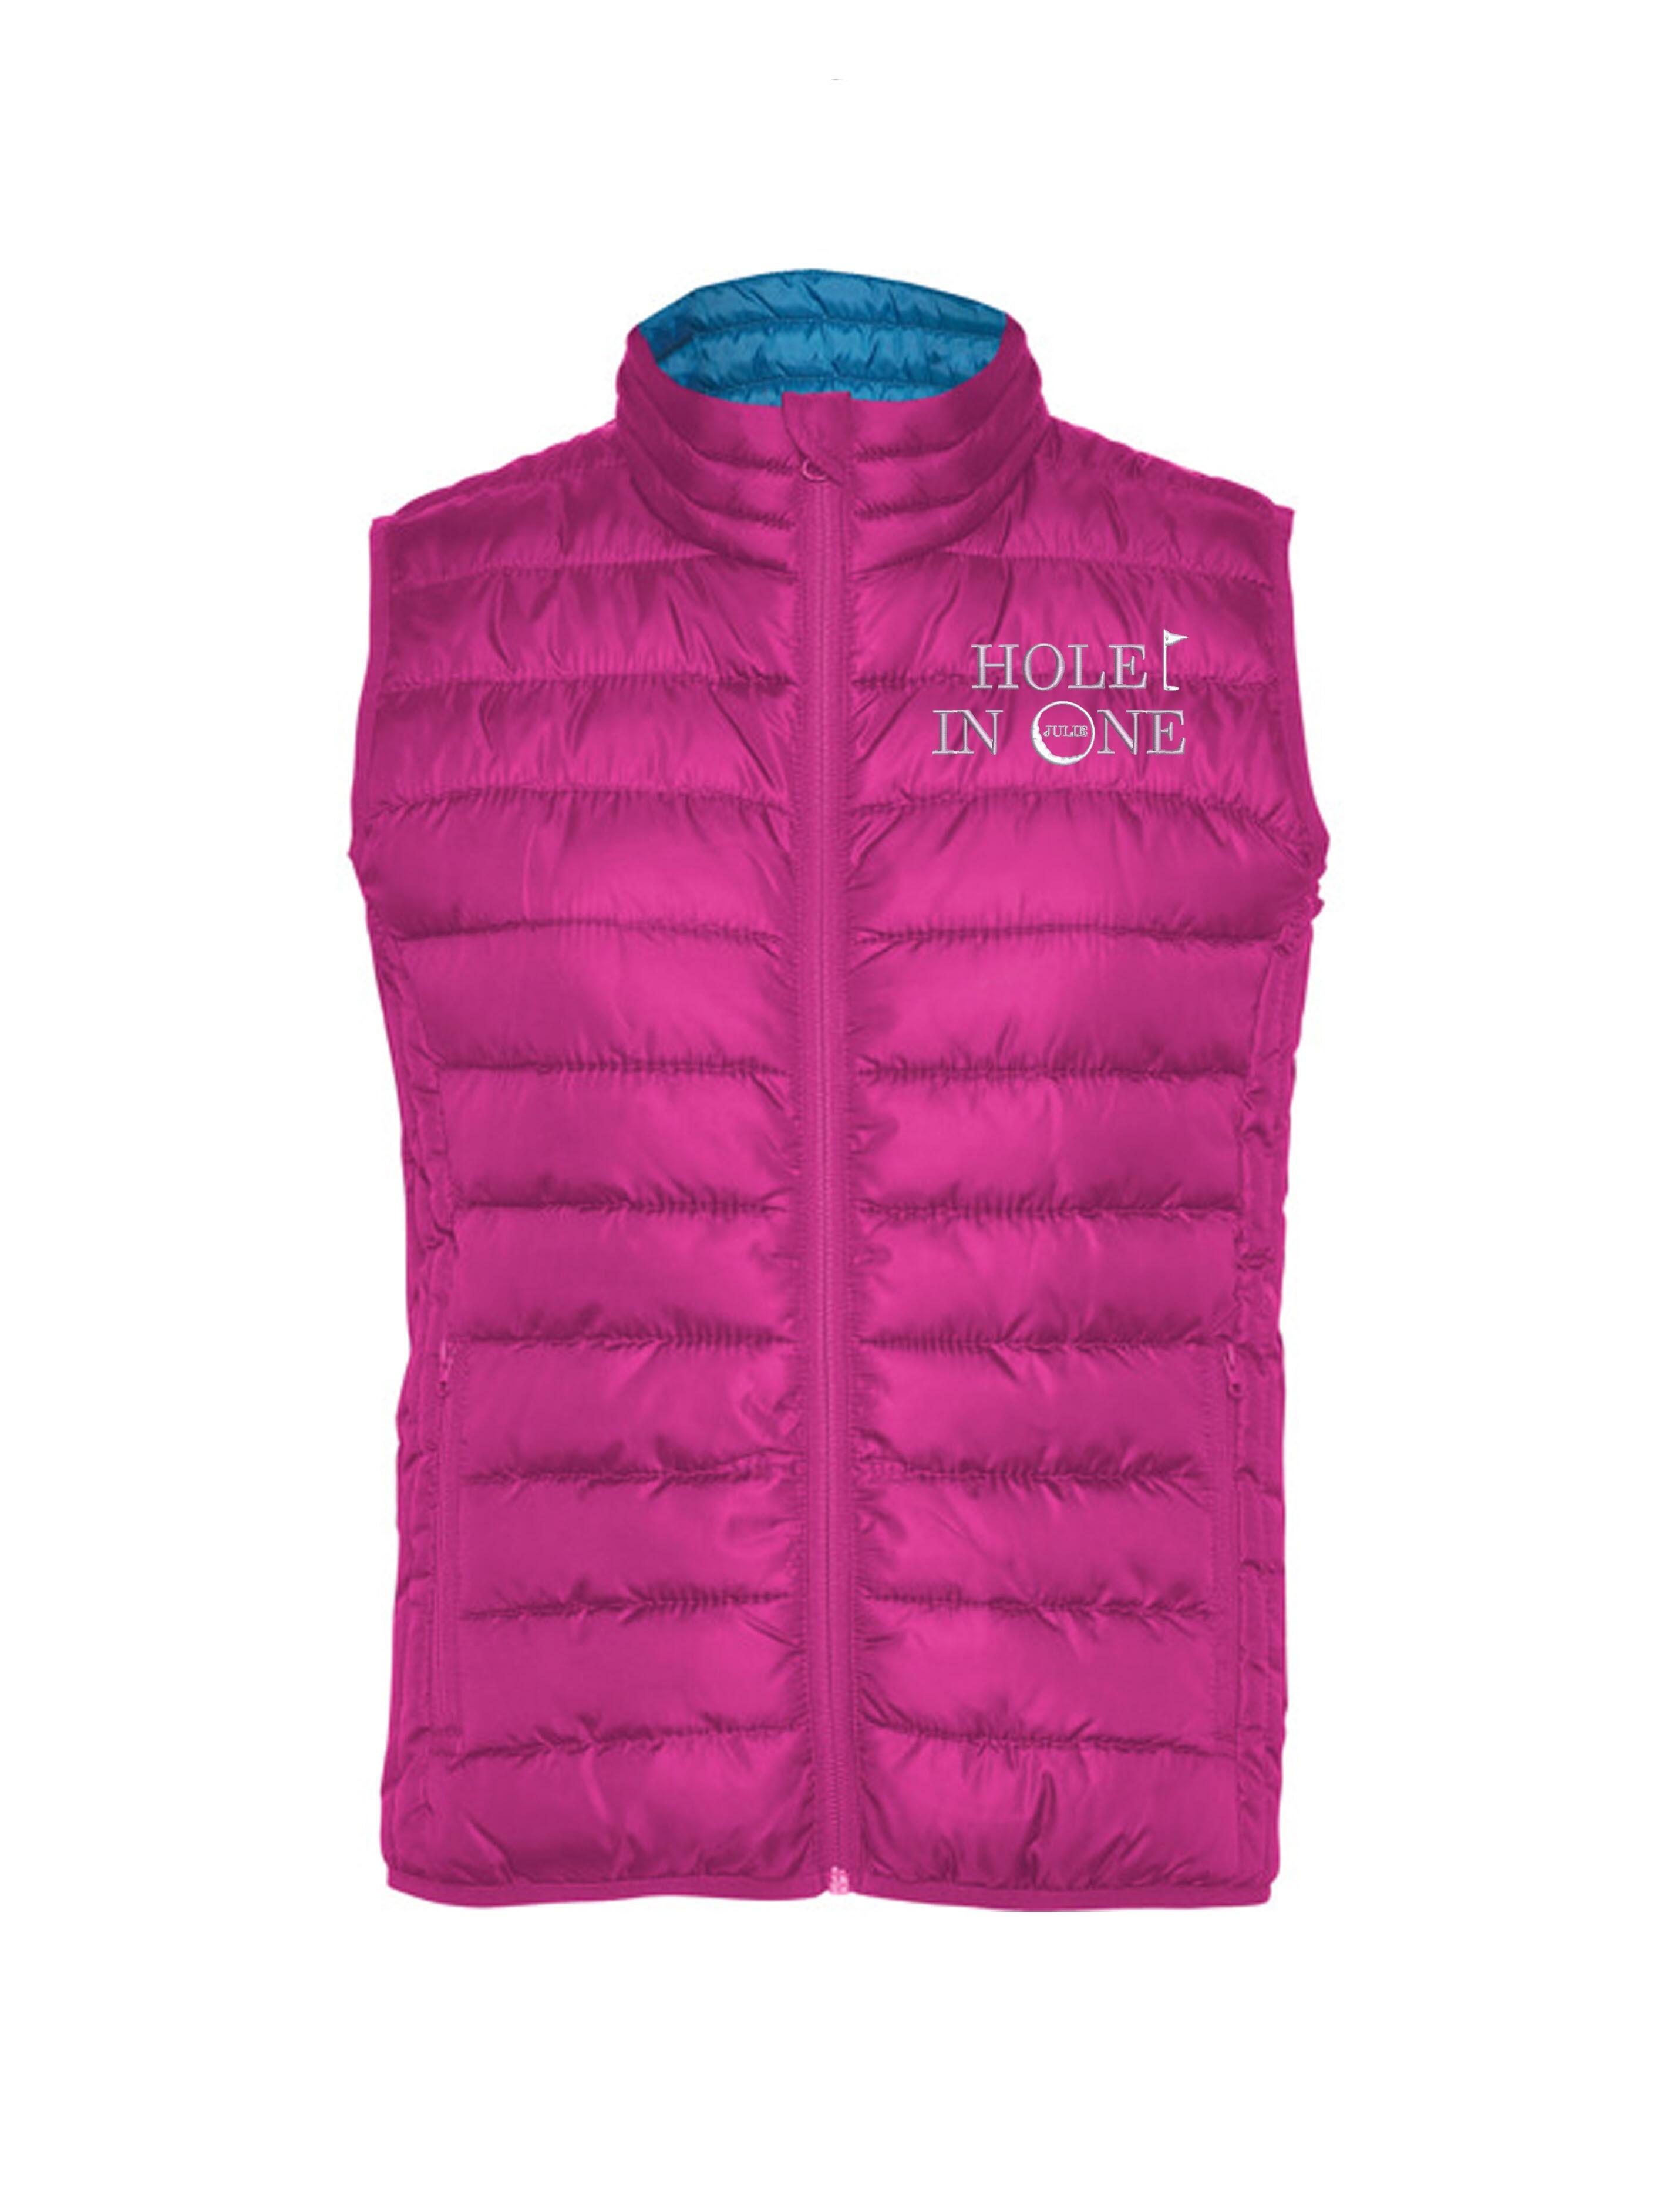 Hole in 1 Design Women's Embroidered Feather Golf Gilet Hot Pink